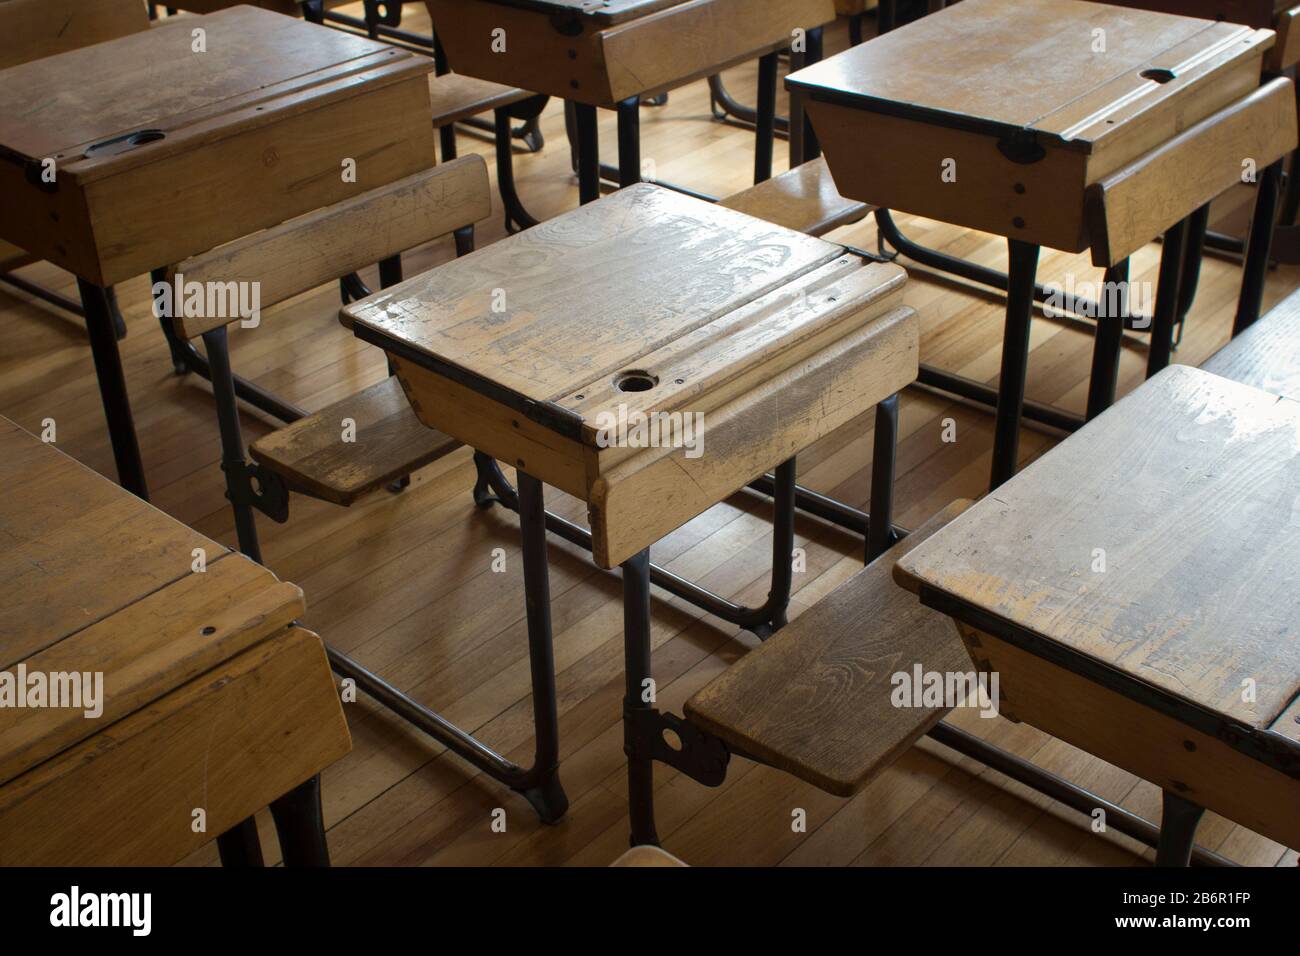 Old Style Classroom Stock Photos Old Style Classroom Stock